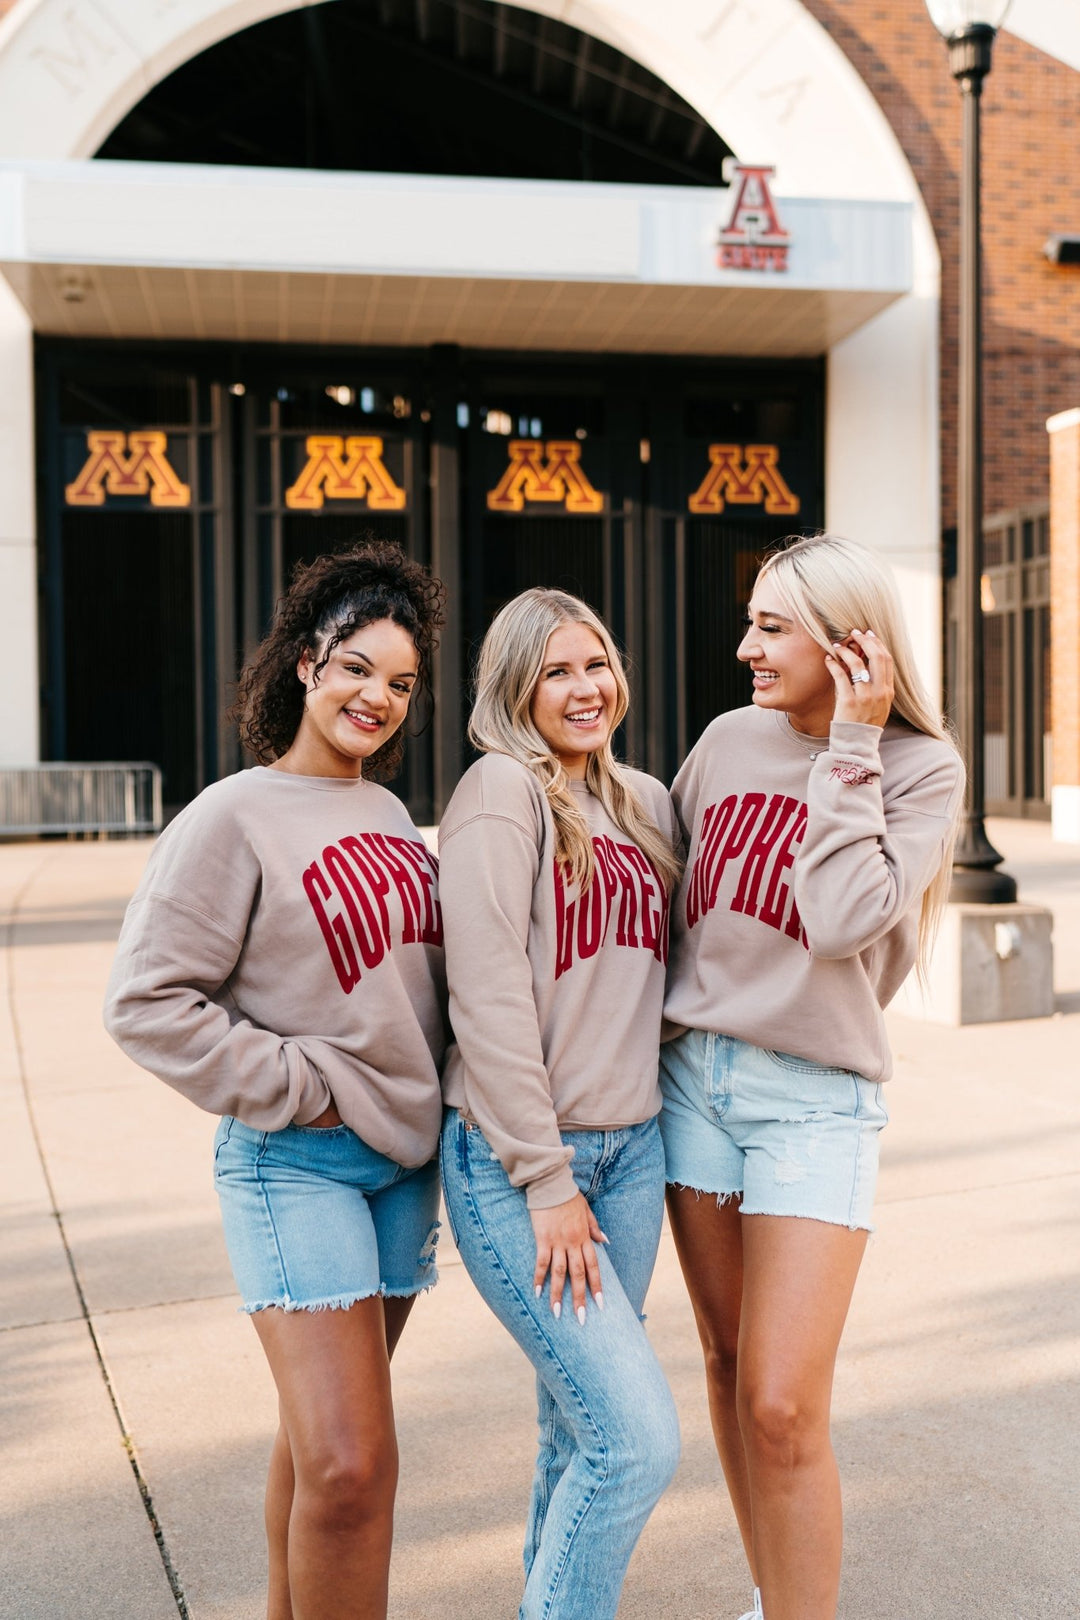 The Gophers Crew - Fan Girl Clothing